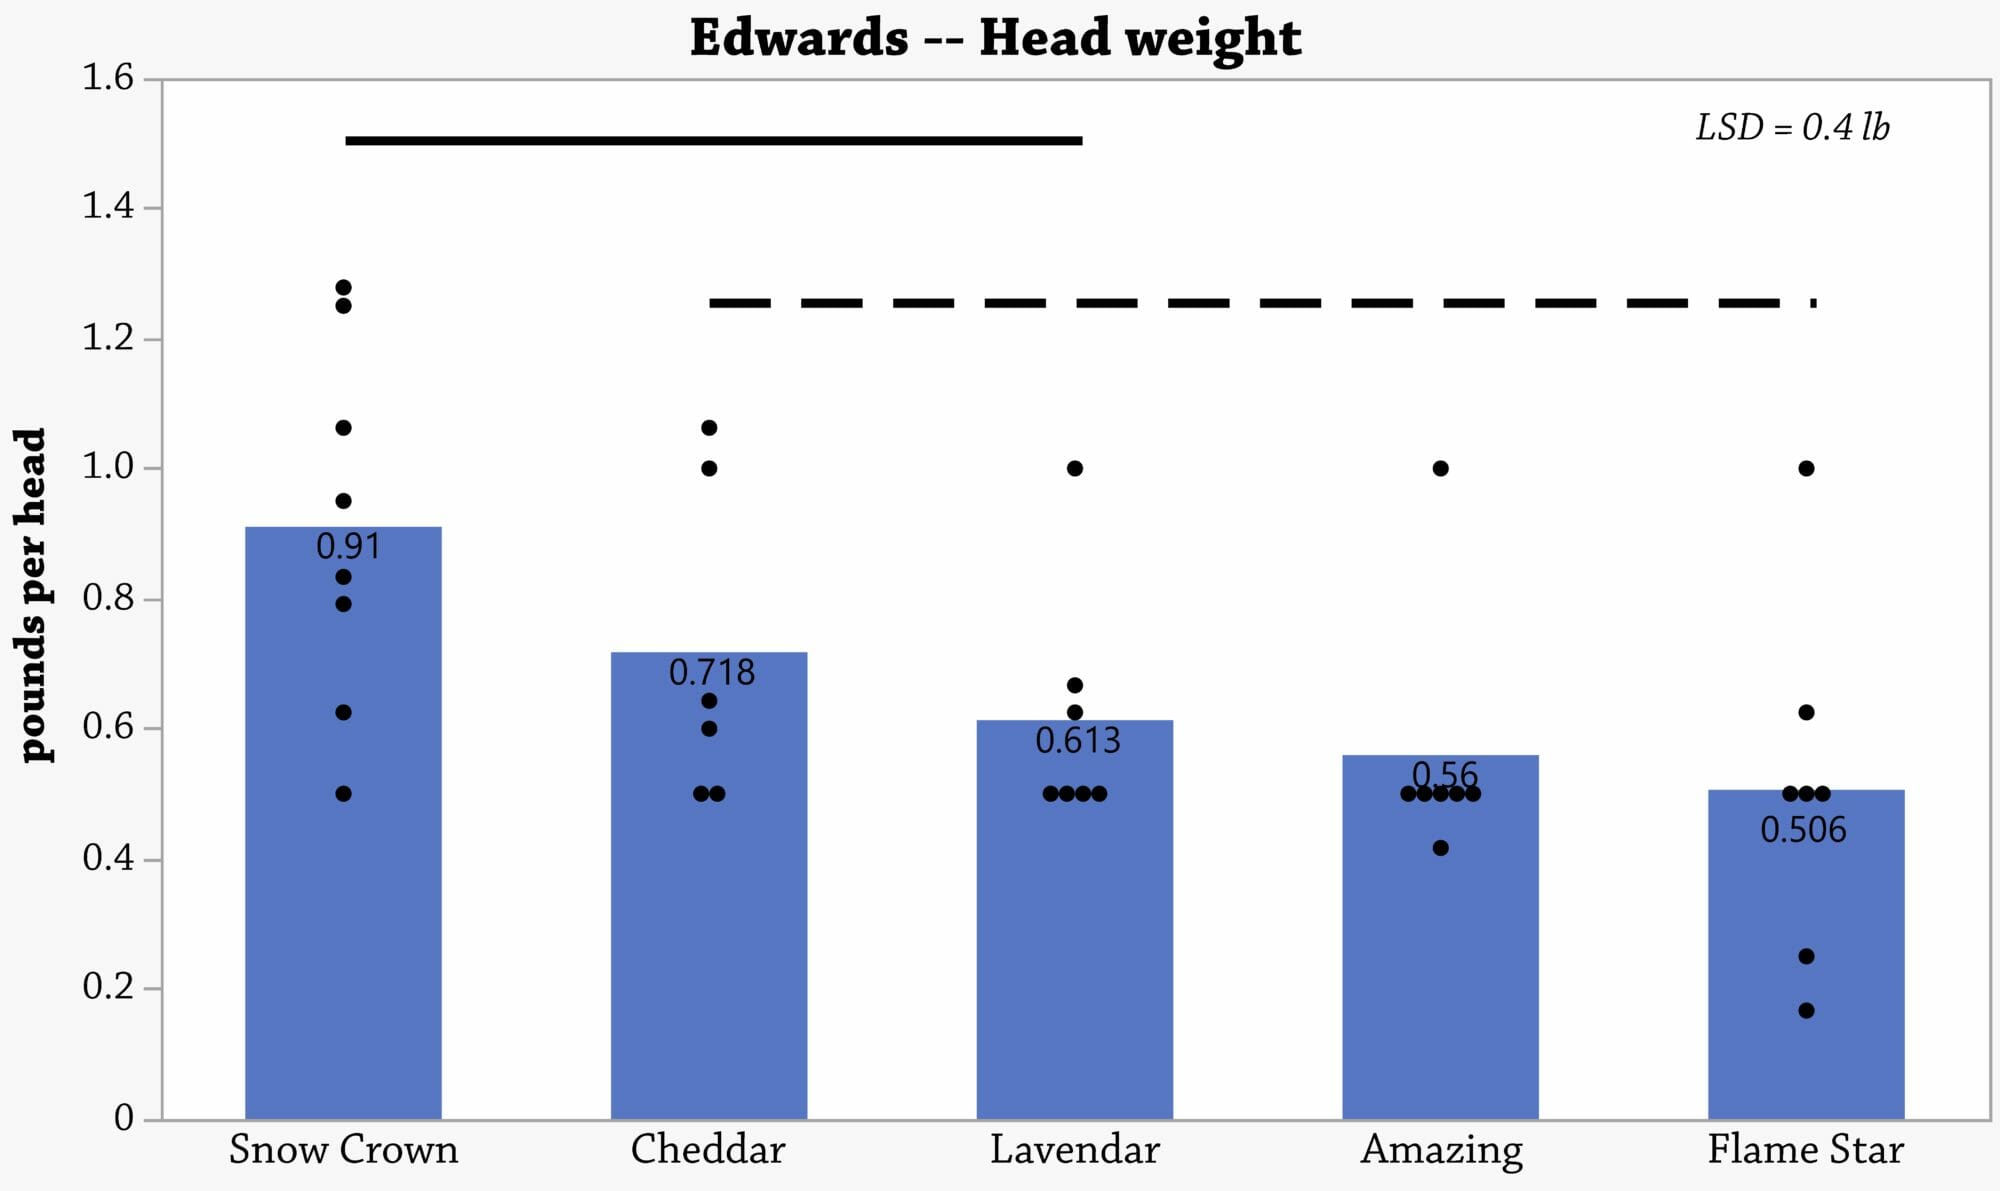 Head weight of cauliflower across both successions at Kate Edwards’ farm